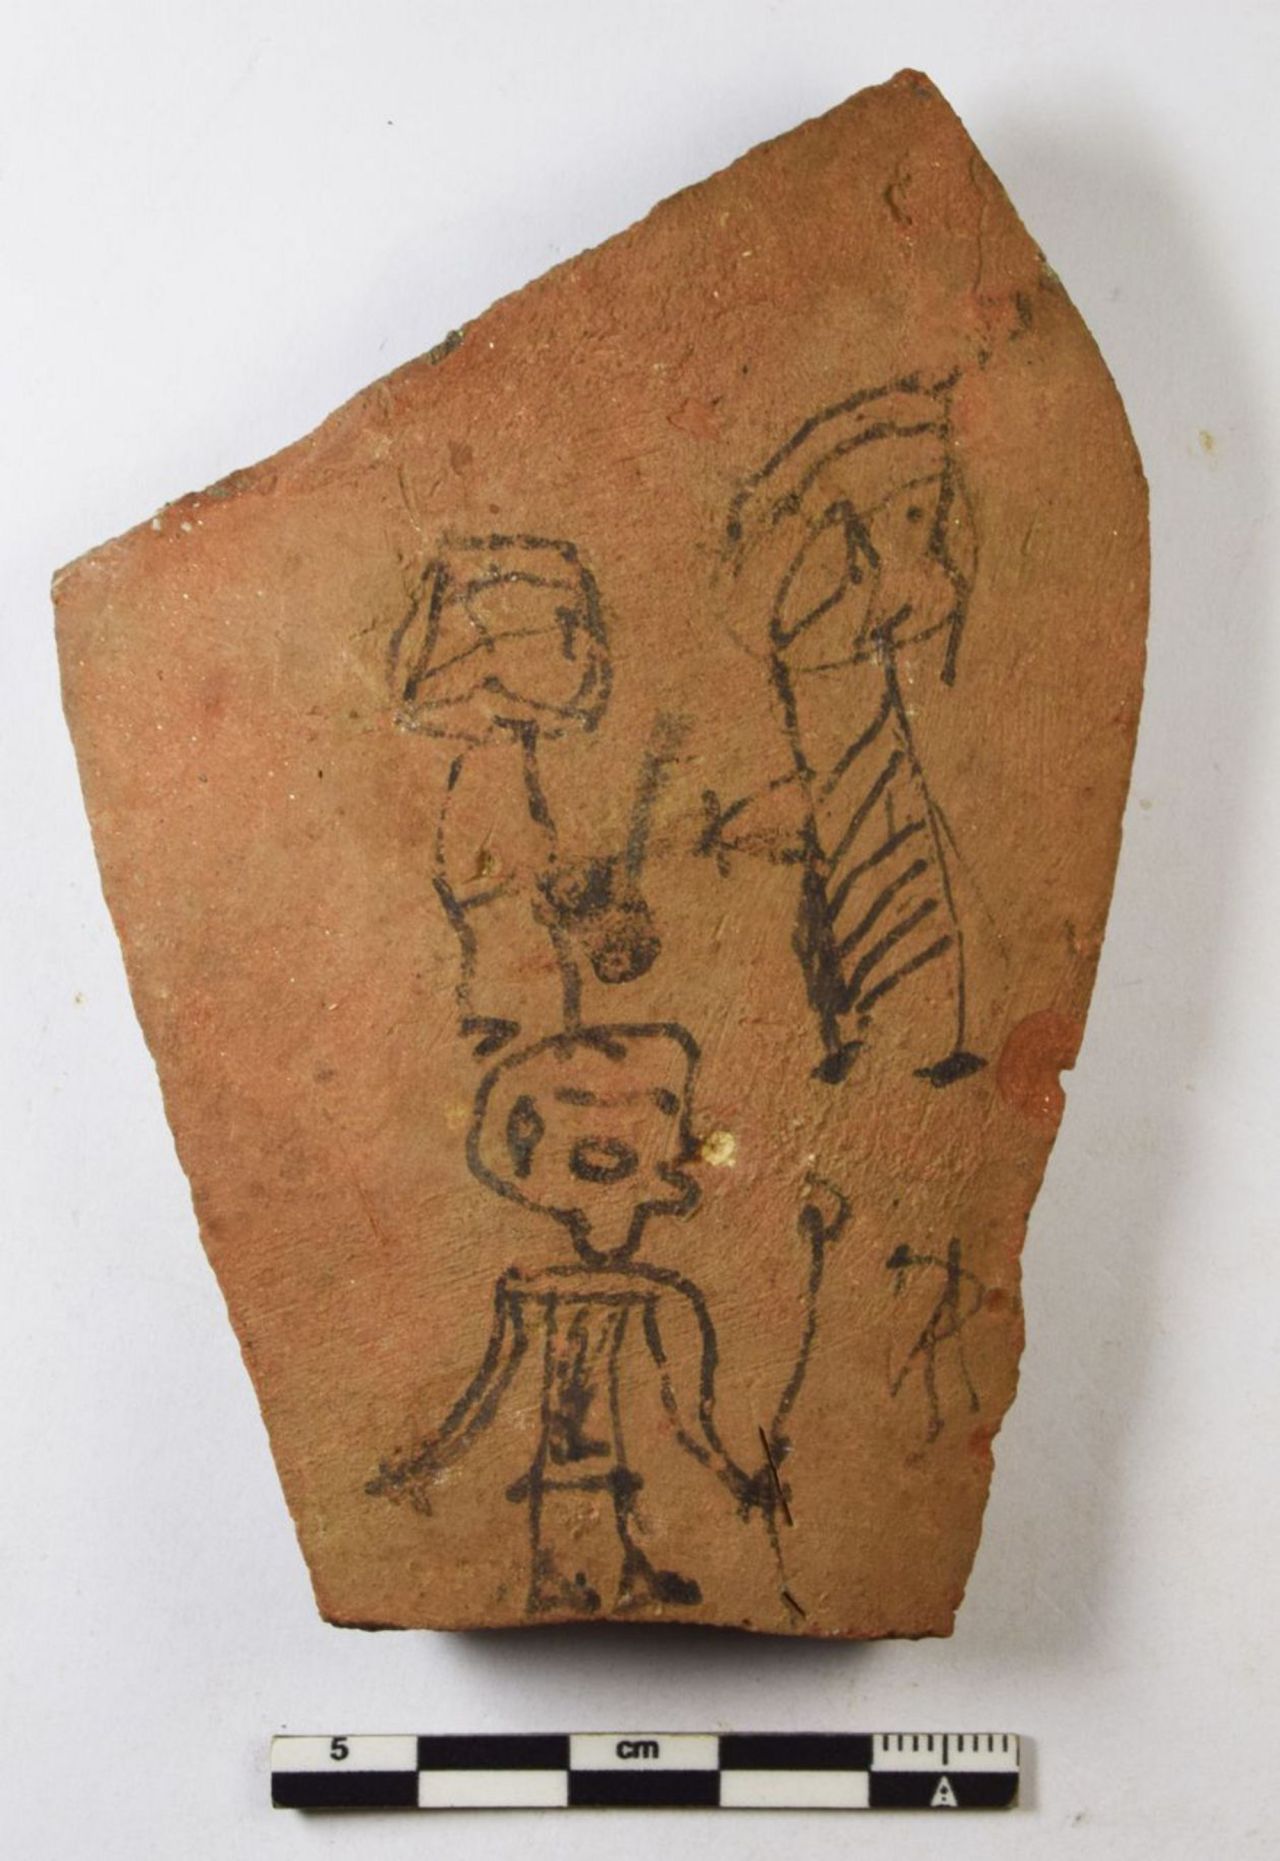 A child's drawing was among the 18,000 inscribed fragments found at the site.